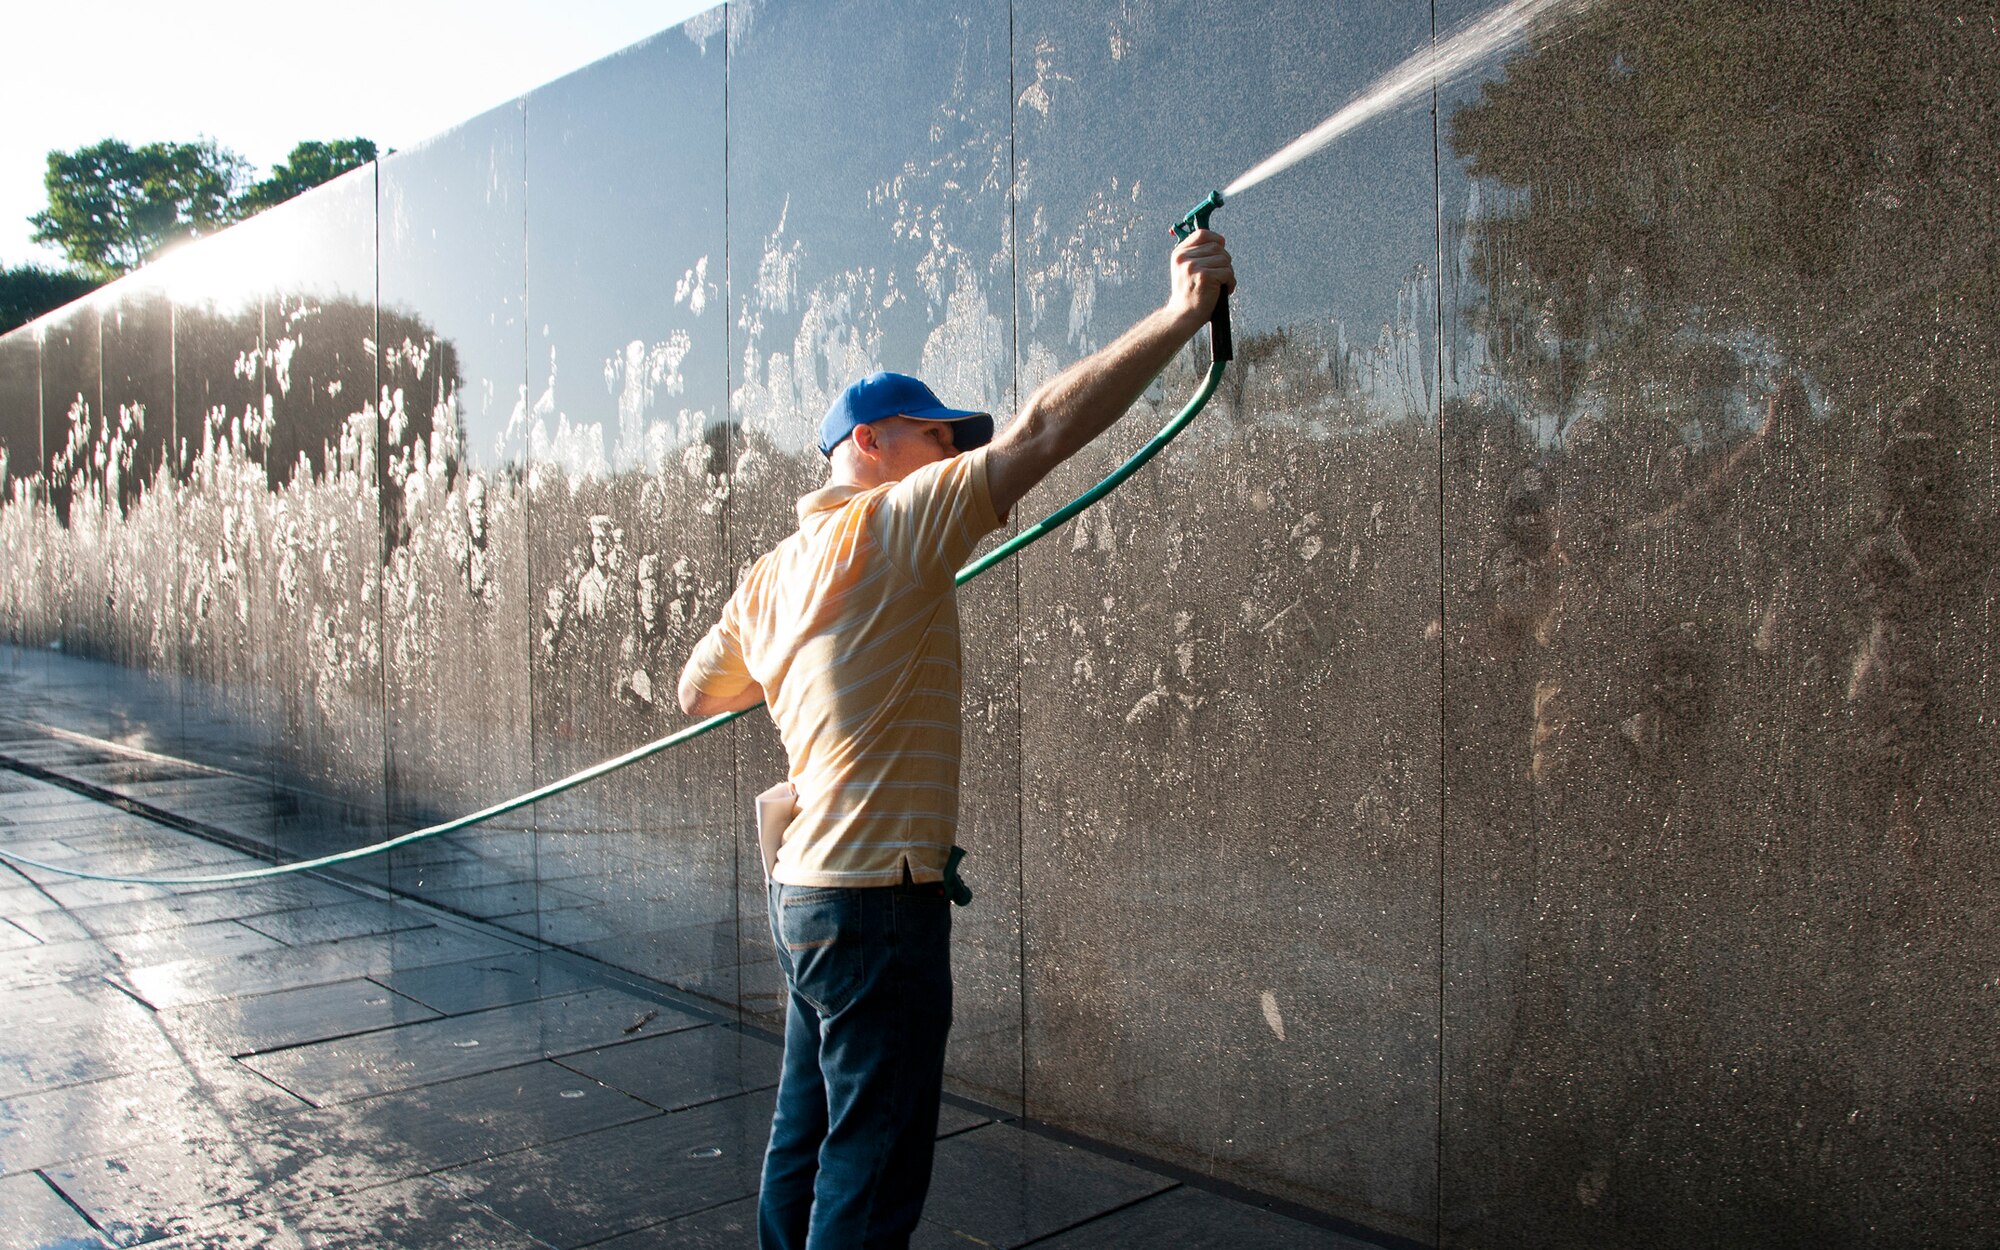 A first sergeant with the 459th Air Refueling Wing hoses soap off the Korean War Veterans Memorial wall in Washington D.C., July 17, 2016. Volunteers from the 459th ARW came out in the early morning hours to clean the memorial prior to the arrival of daily visitors. (U.S. Air Force photo/Staff Sgt. Kat Justen) 